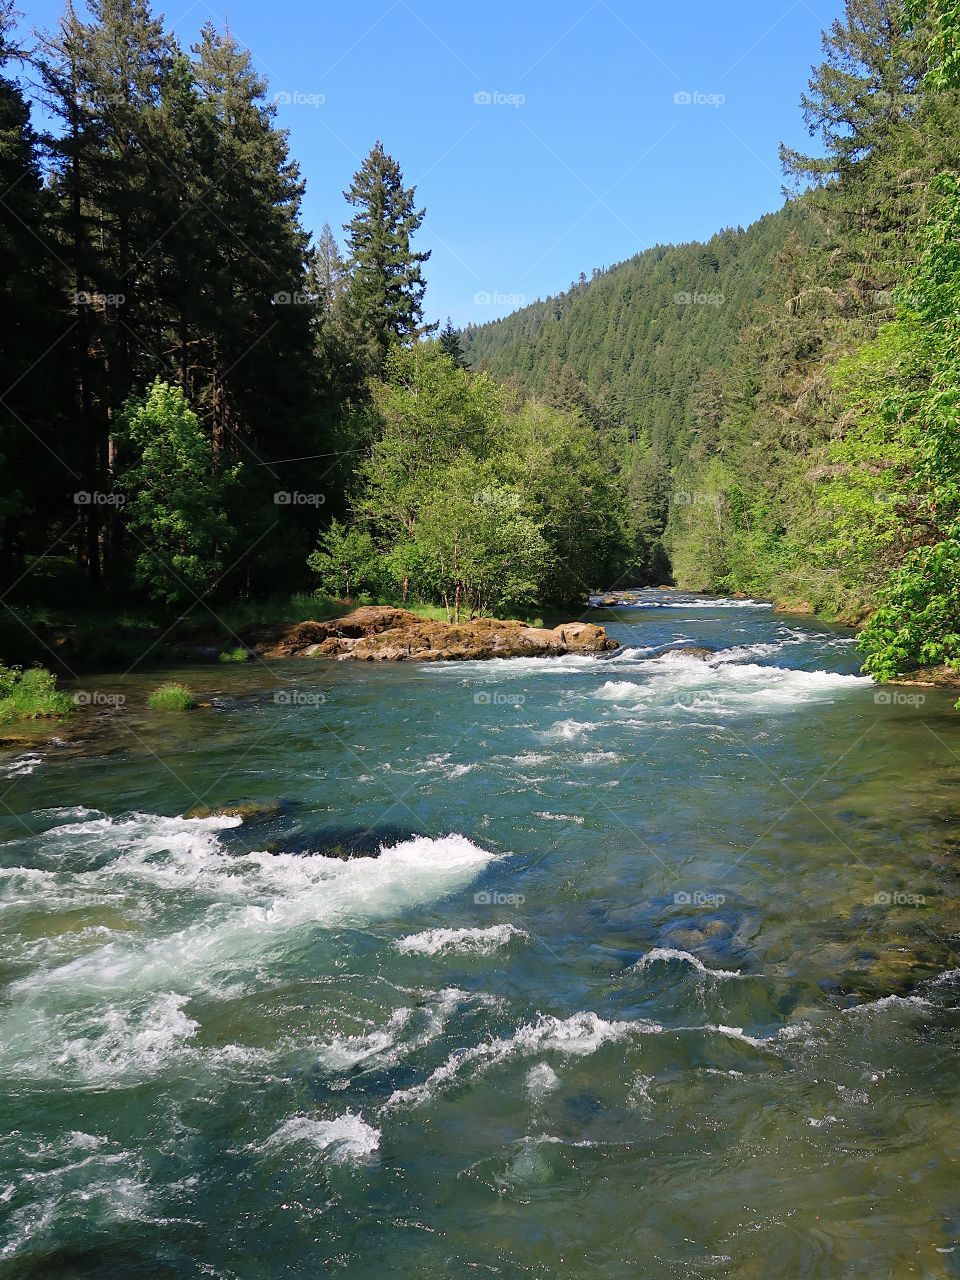 The incredible turquoise waters of the Blue River in the Willamette National Forest on a sunny spring day. 